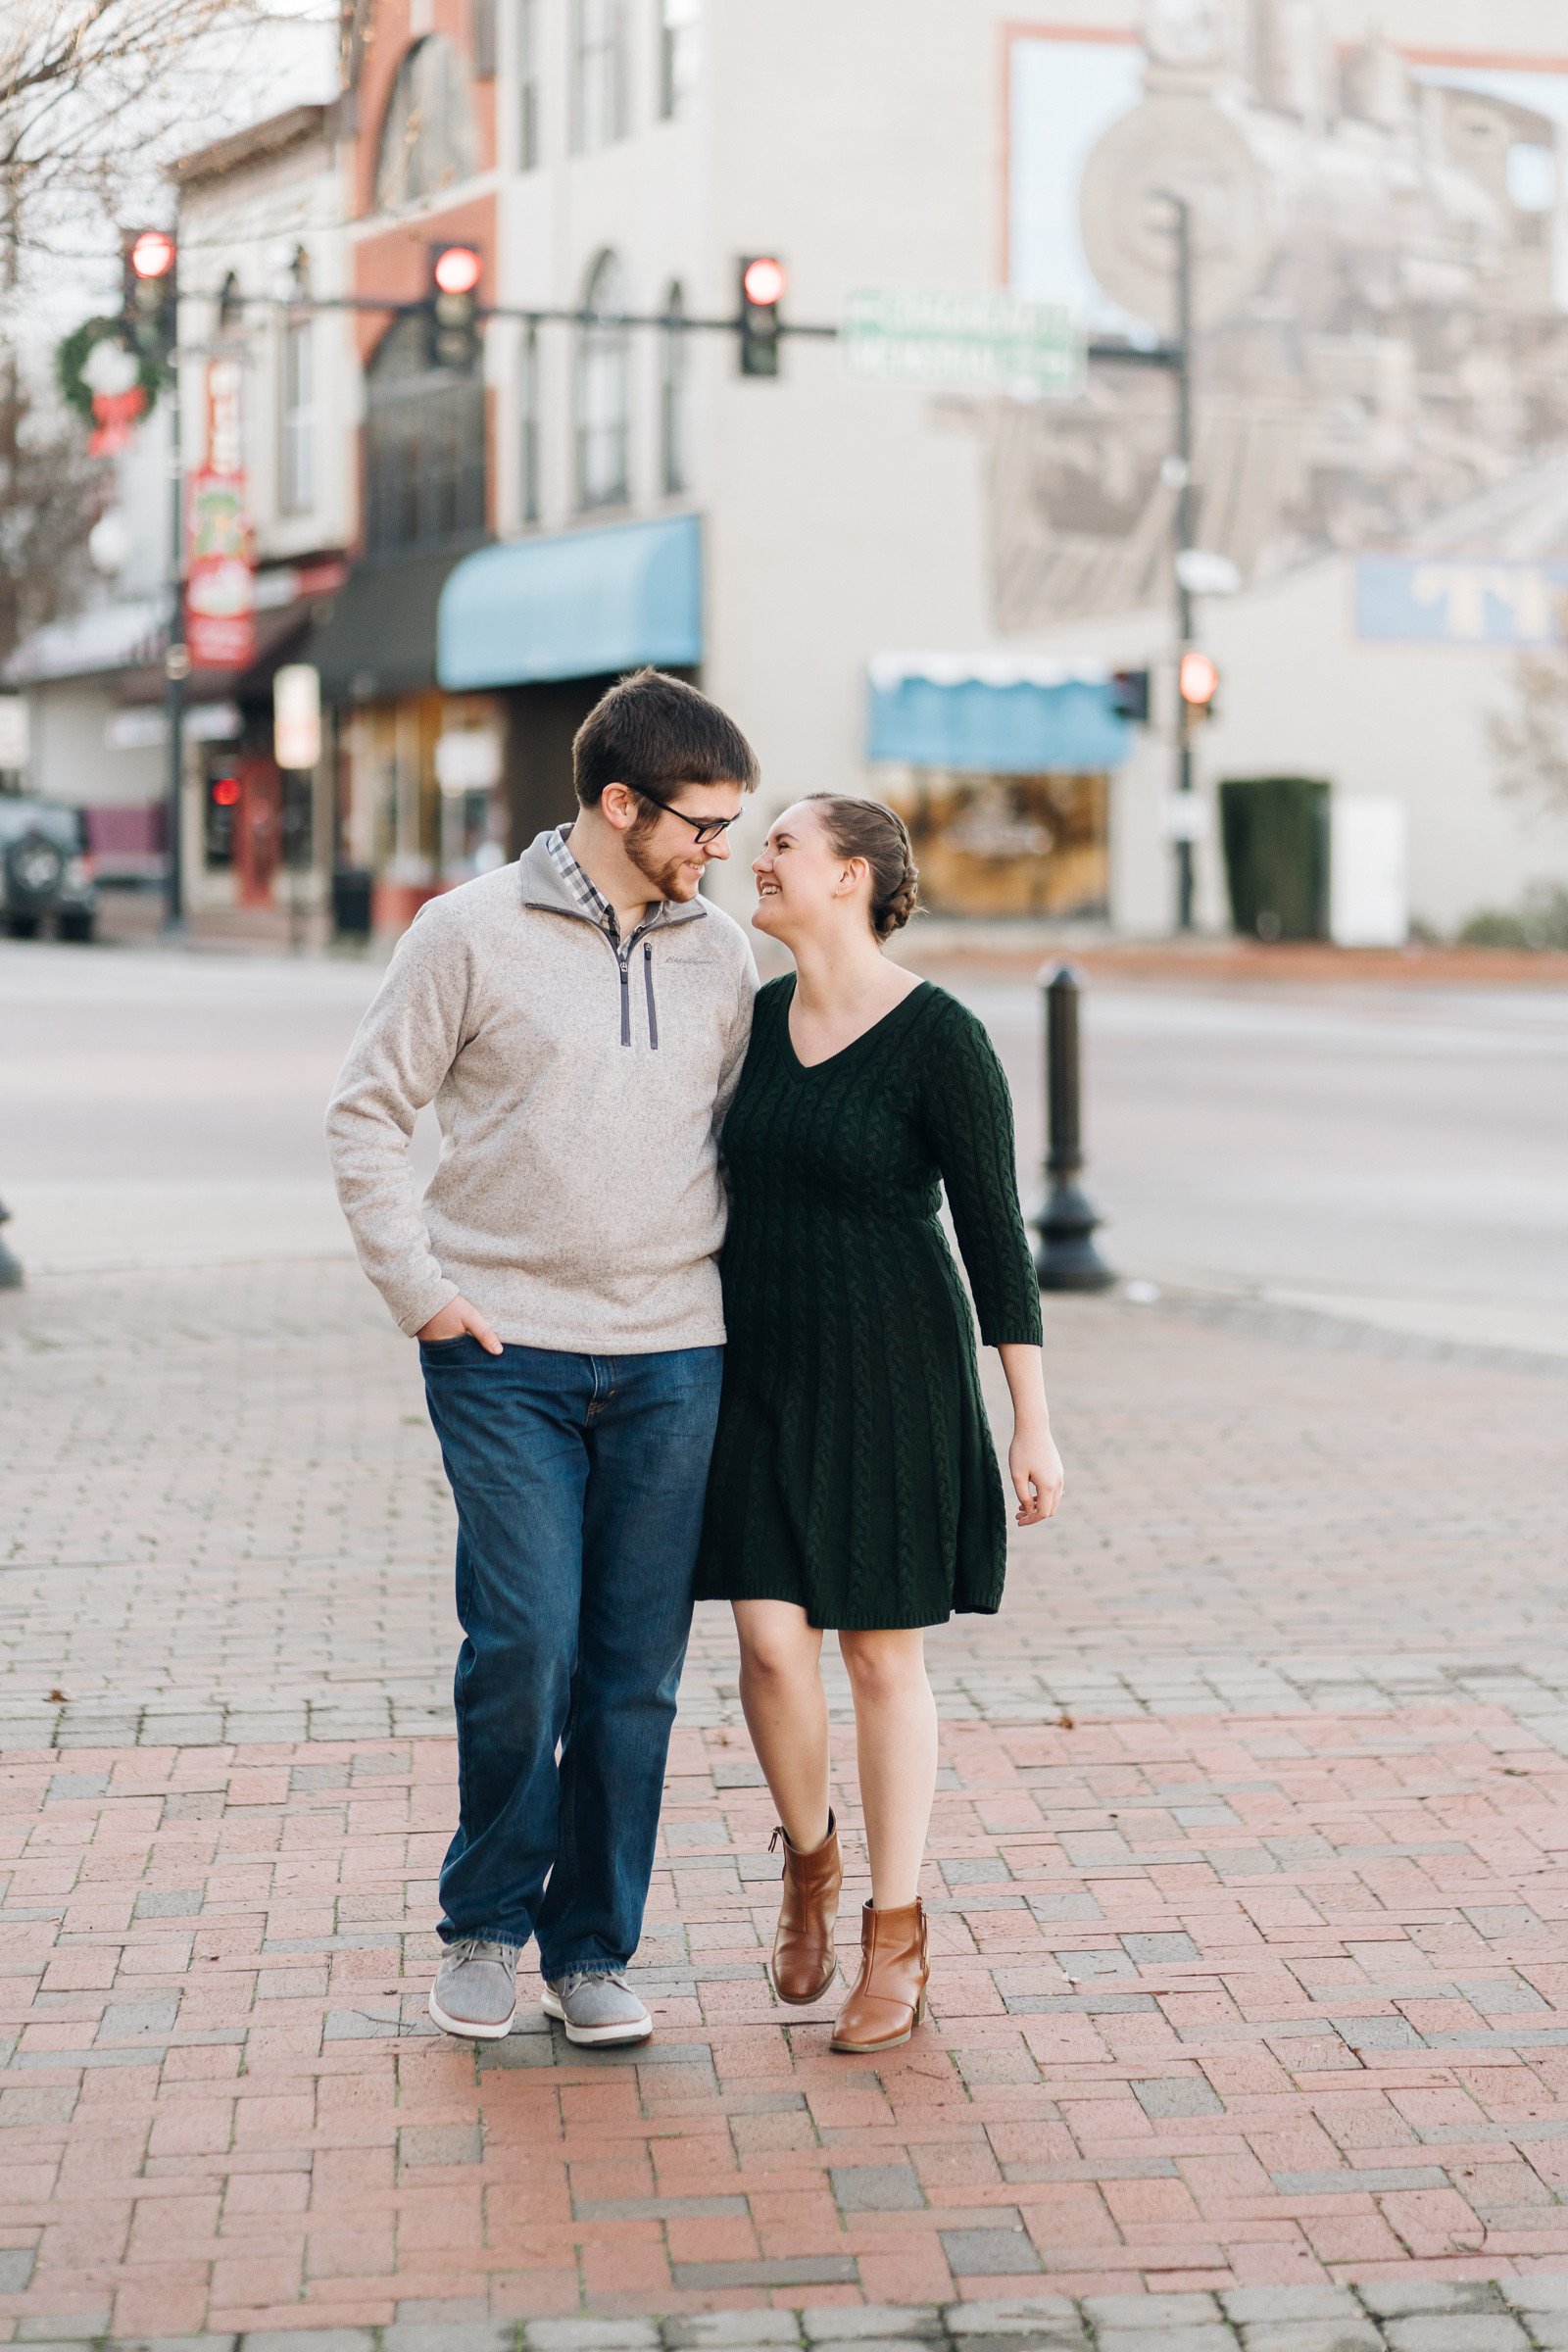 jameson-anna-engagement-session-downtown-danville-river-district-virginia-by-jonathan-hannah-photography-1.jpg